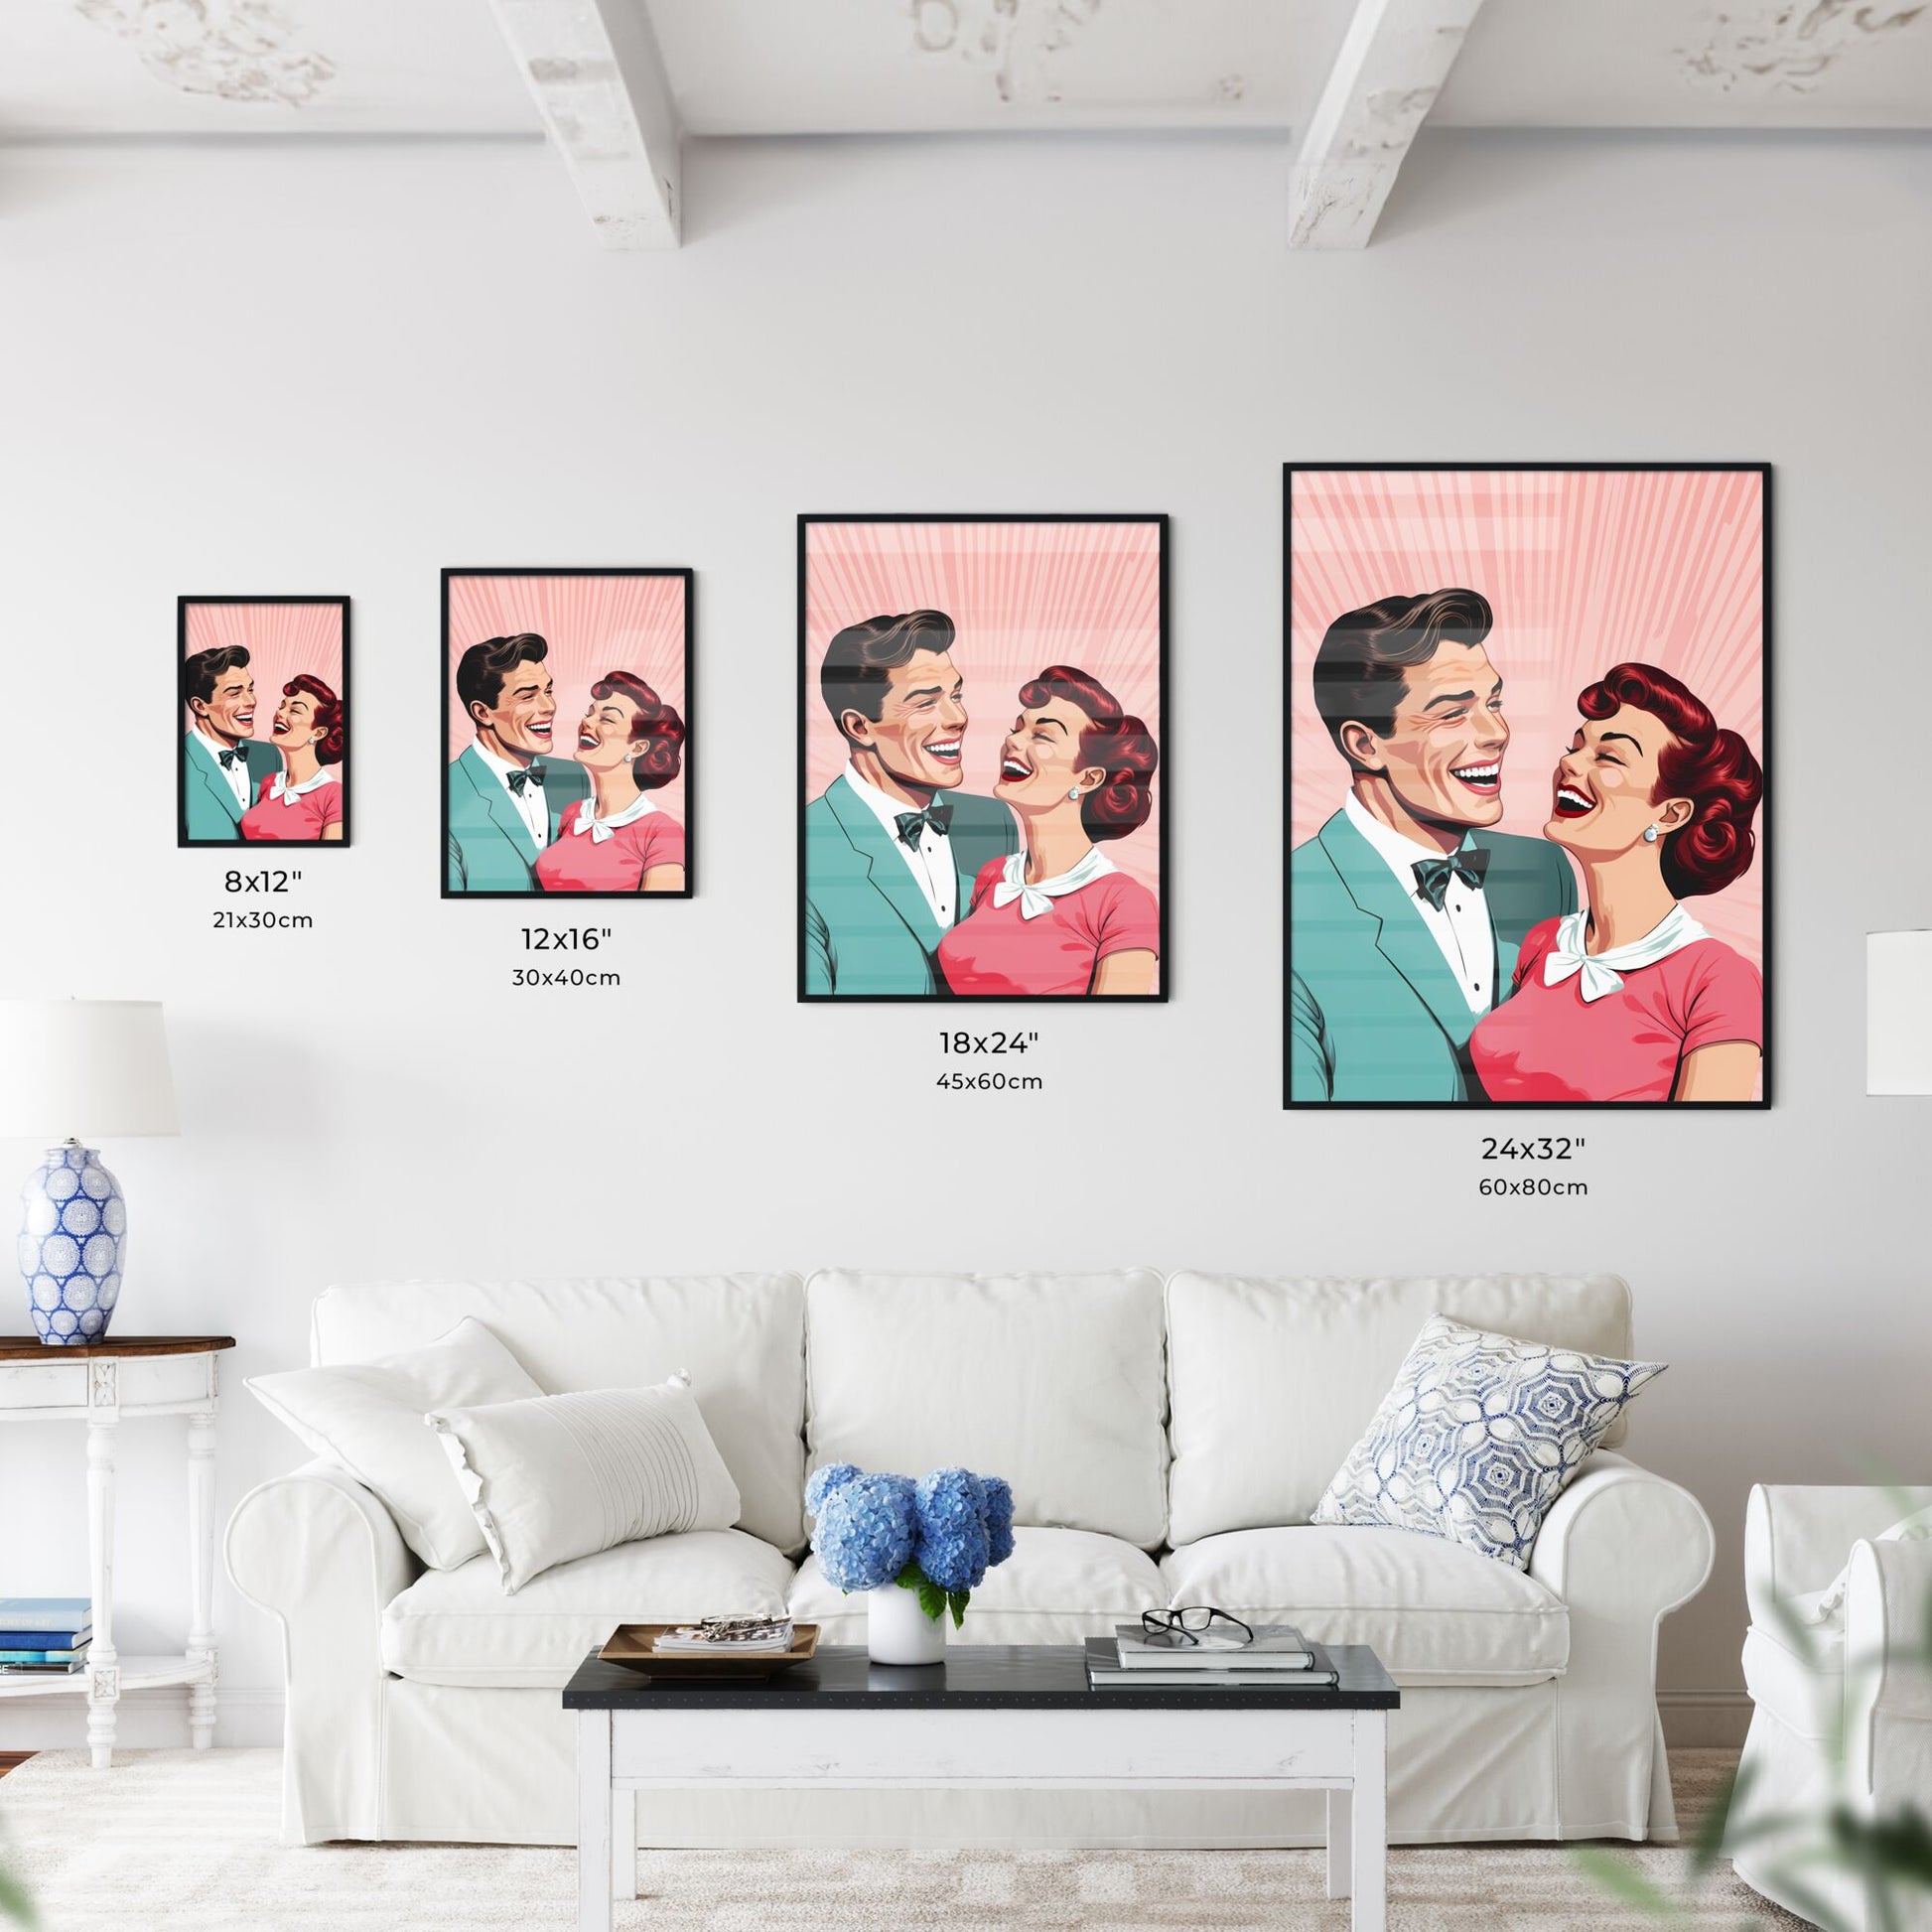 Man And Woman Laughing Art Print Default Title